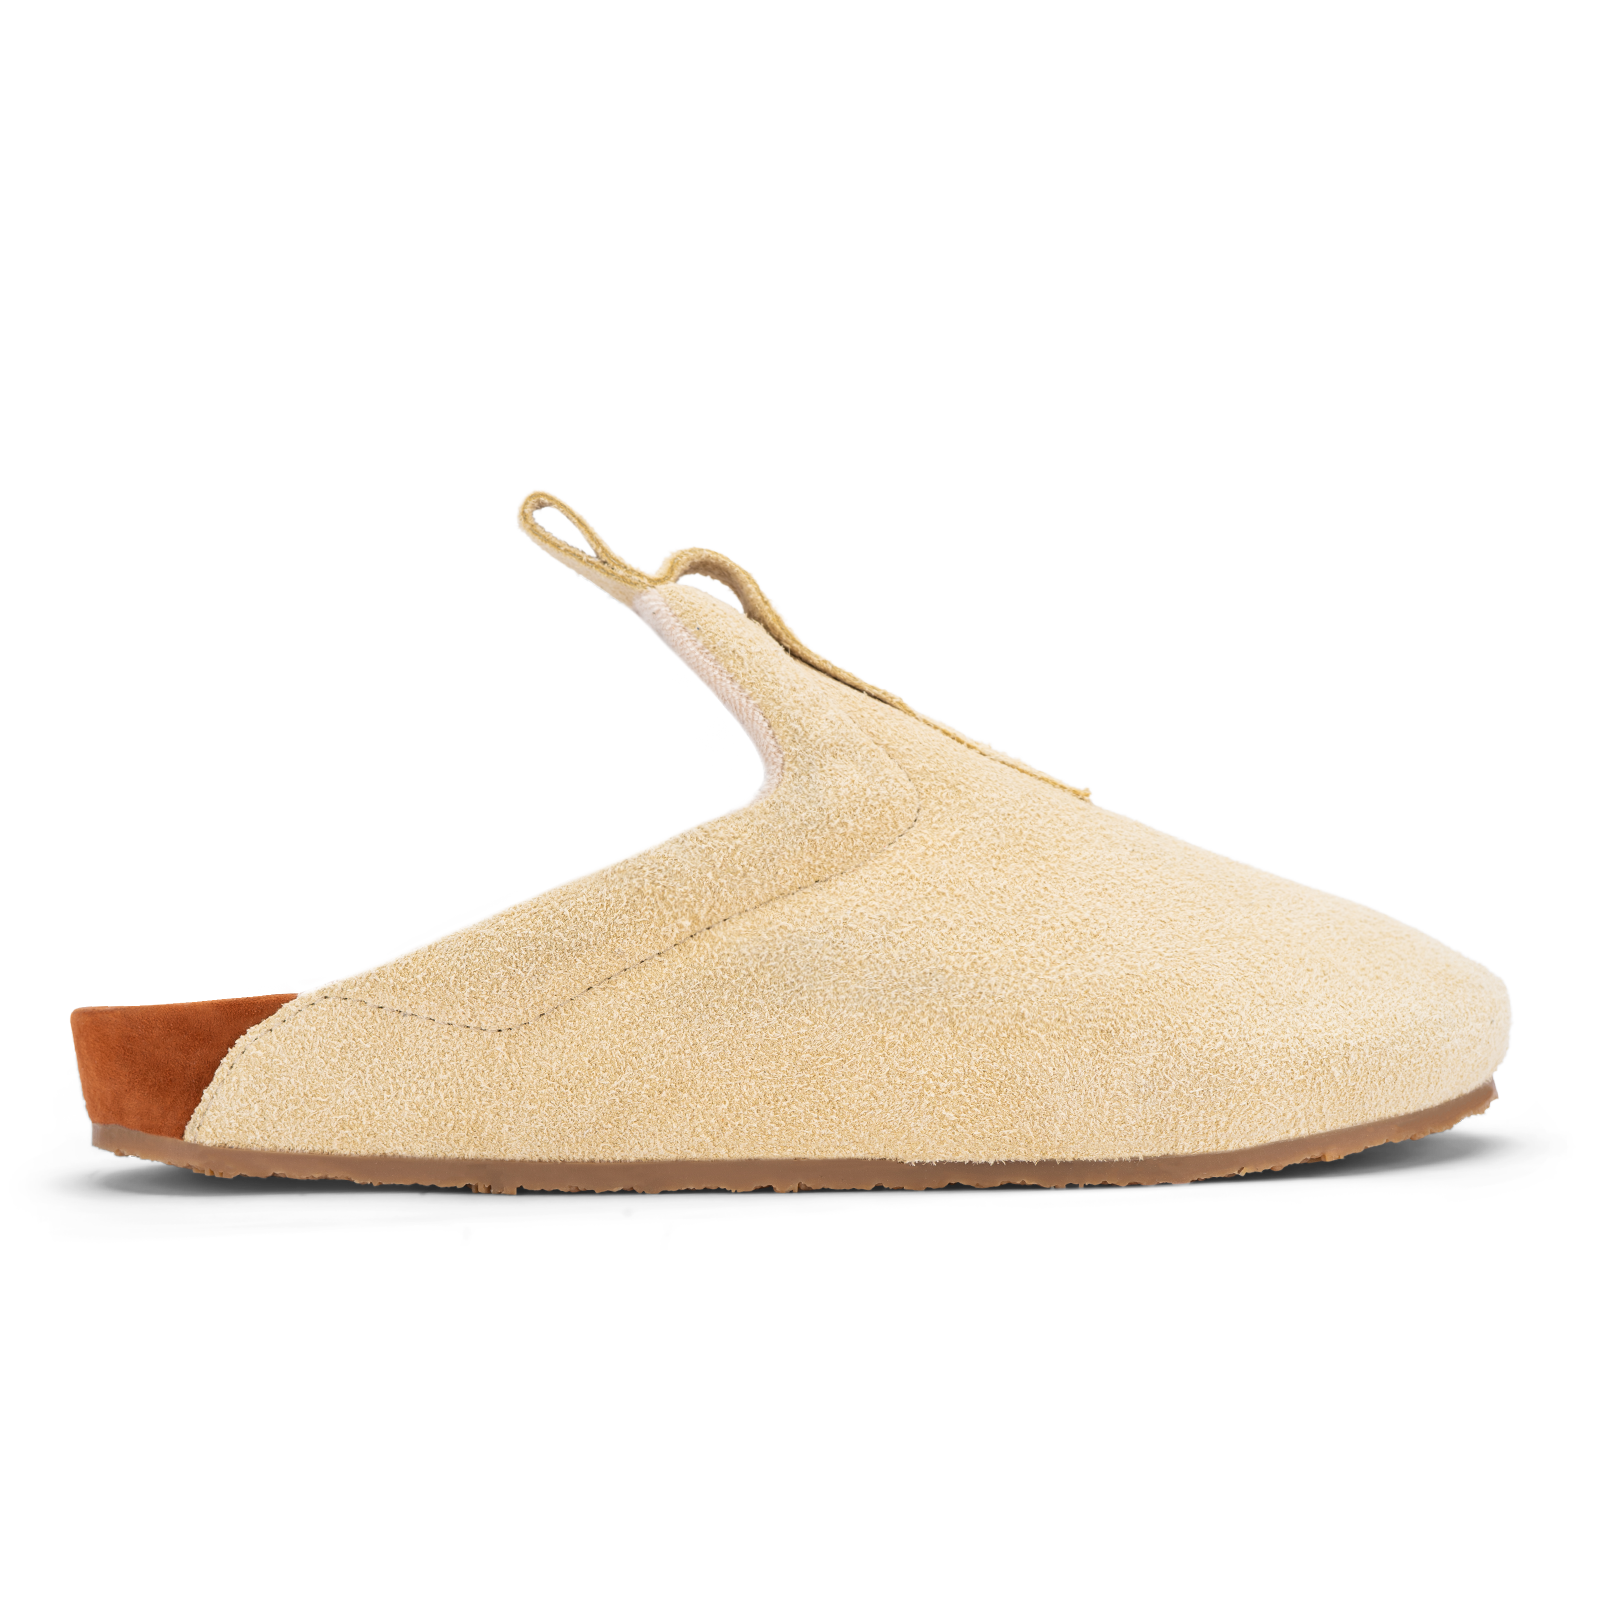 profile view beige suede upper, cork midsole wrapped in soft suede, Vibram sheet gum rubber outsole